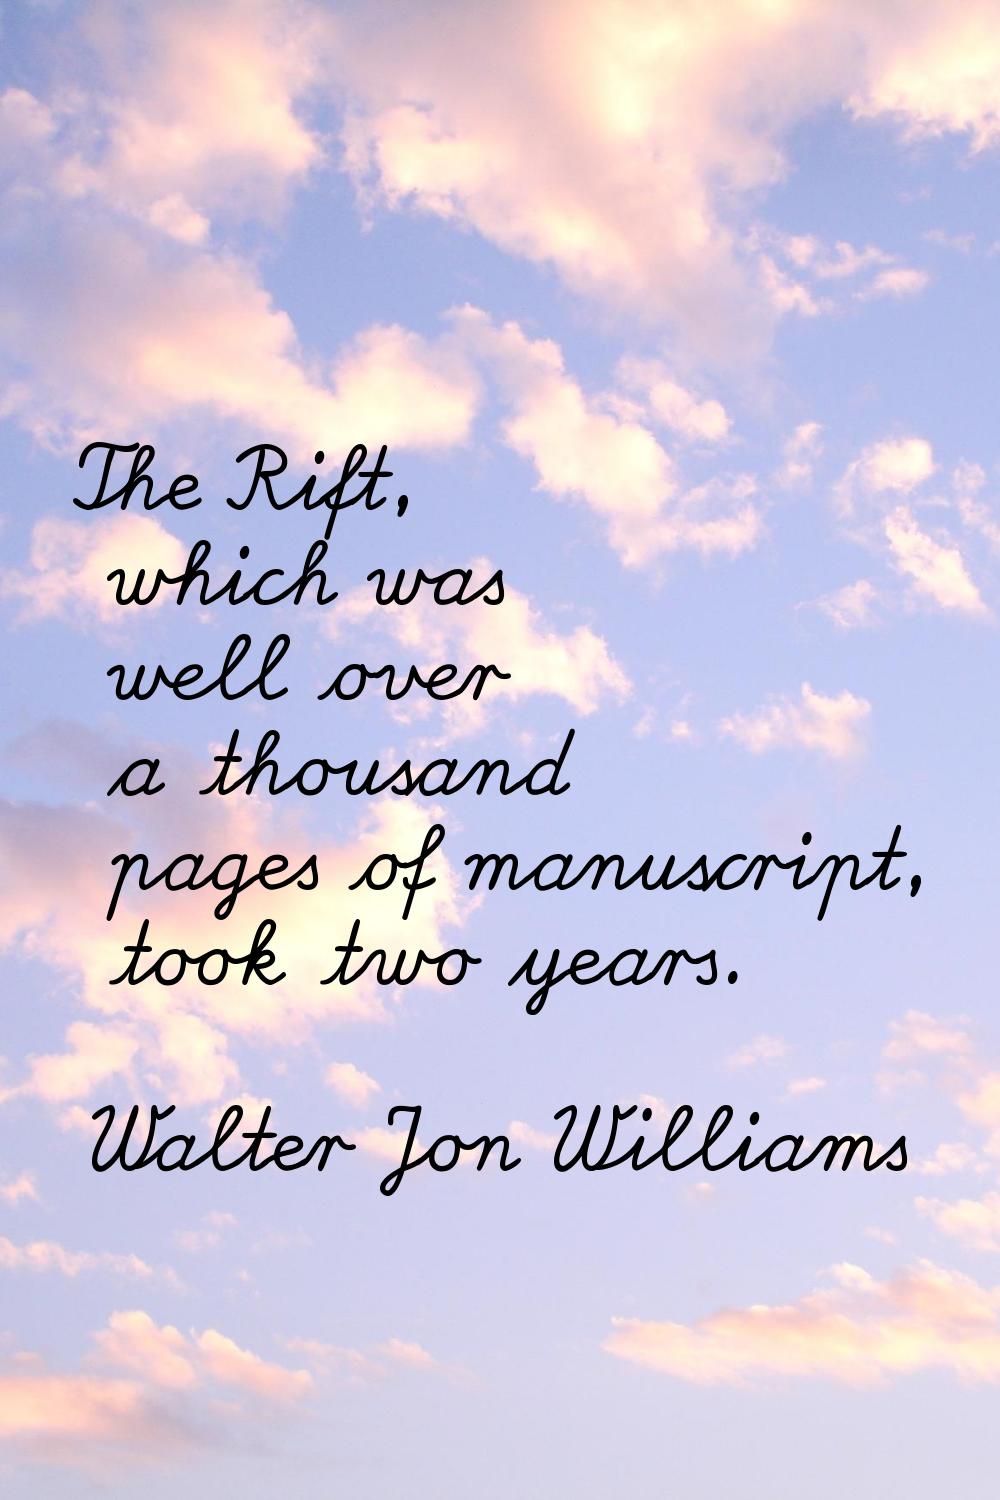 The Rift, which was well over a thousand pages of manuscript, took two years.